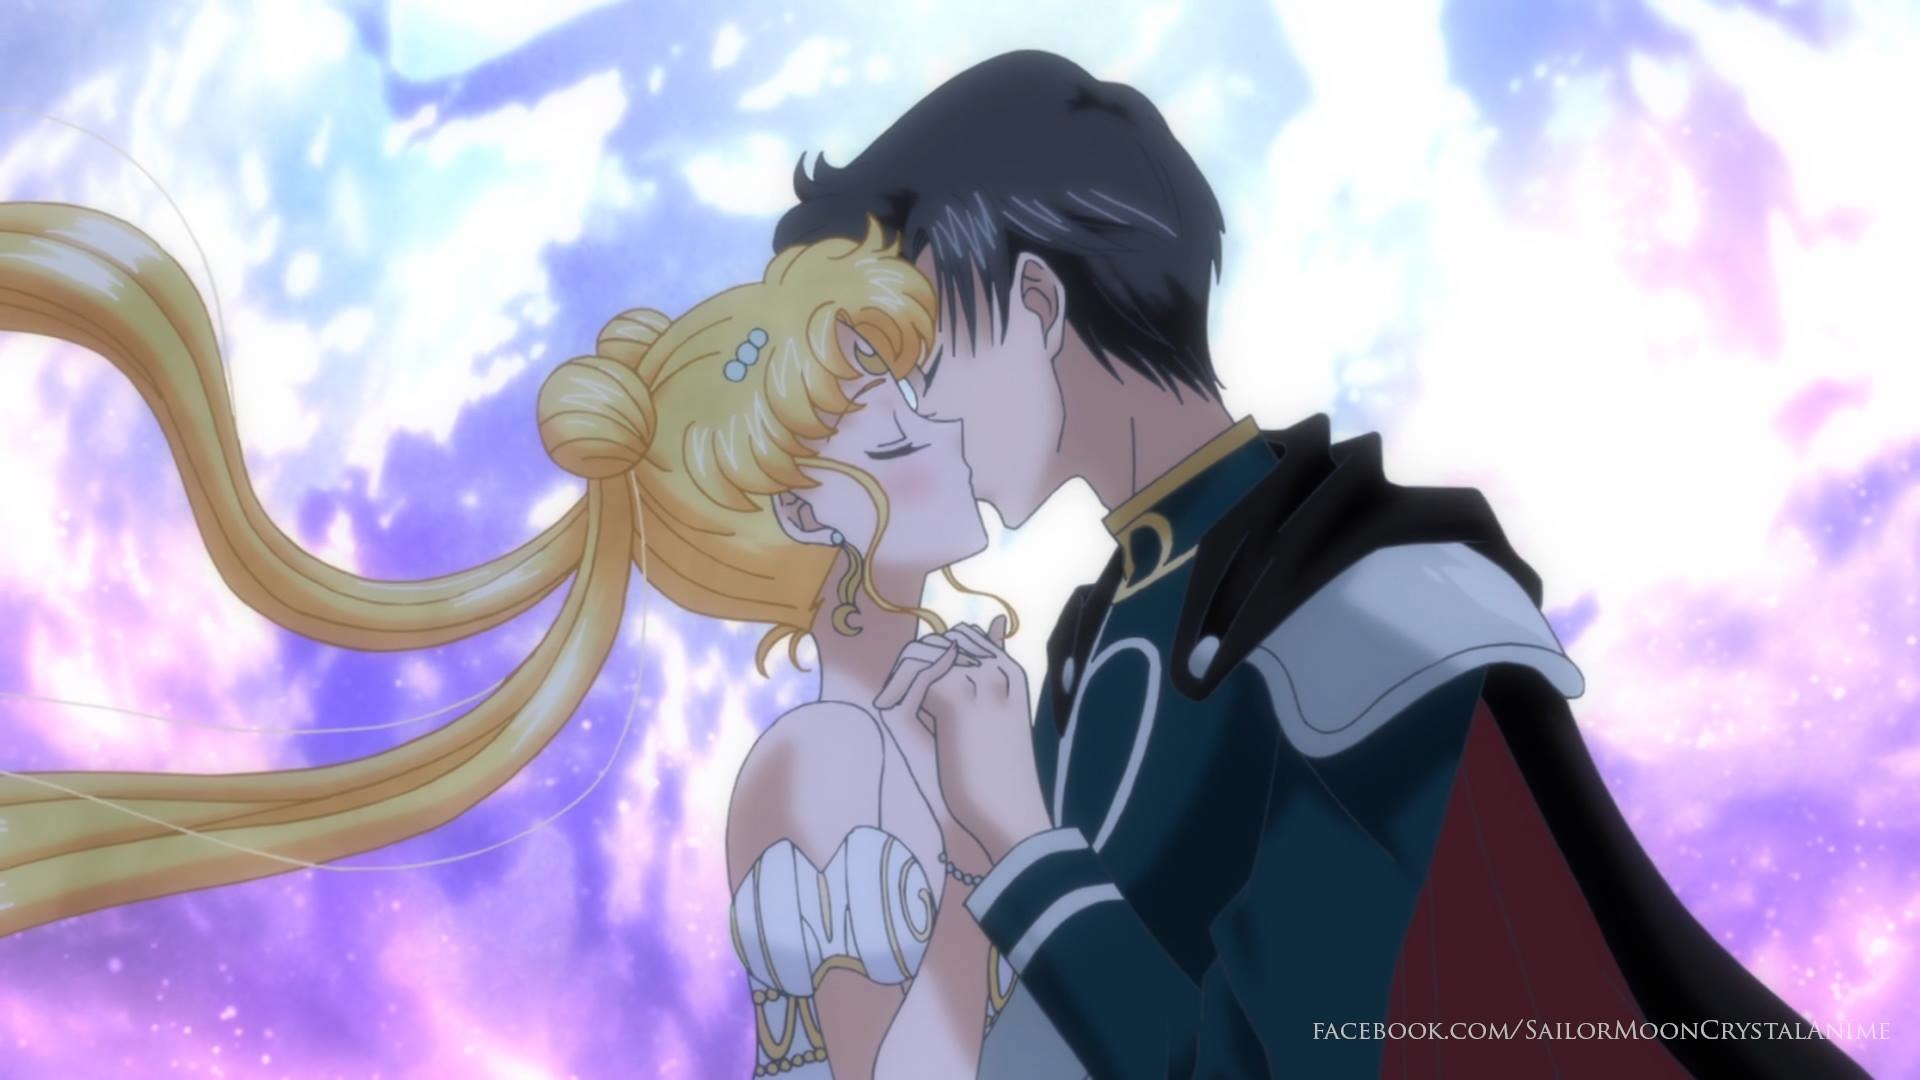 1920x1080 Sailor Moon And Tuxedo Mask Wallpaper posted by Sarah Cunningham